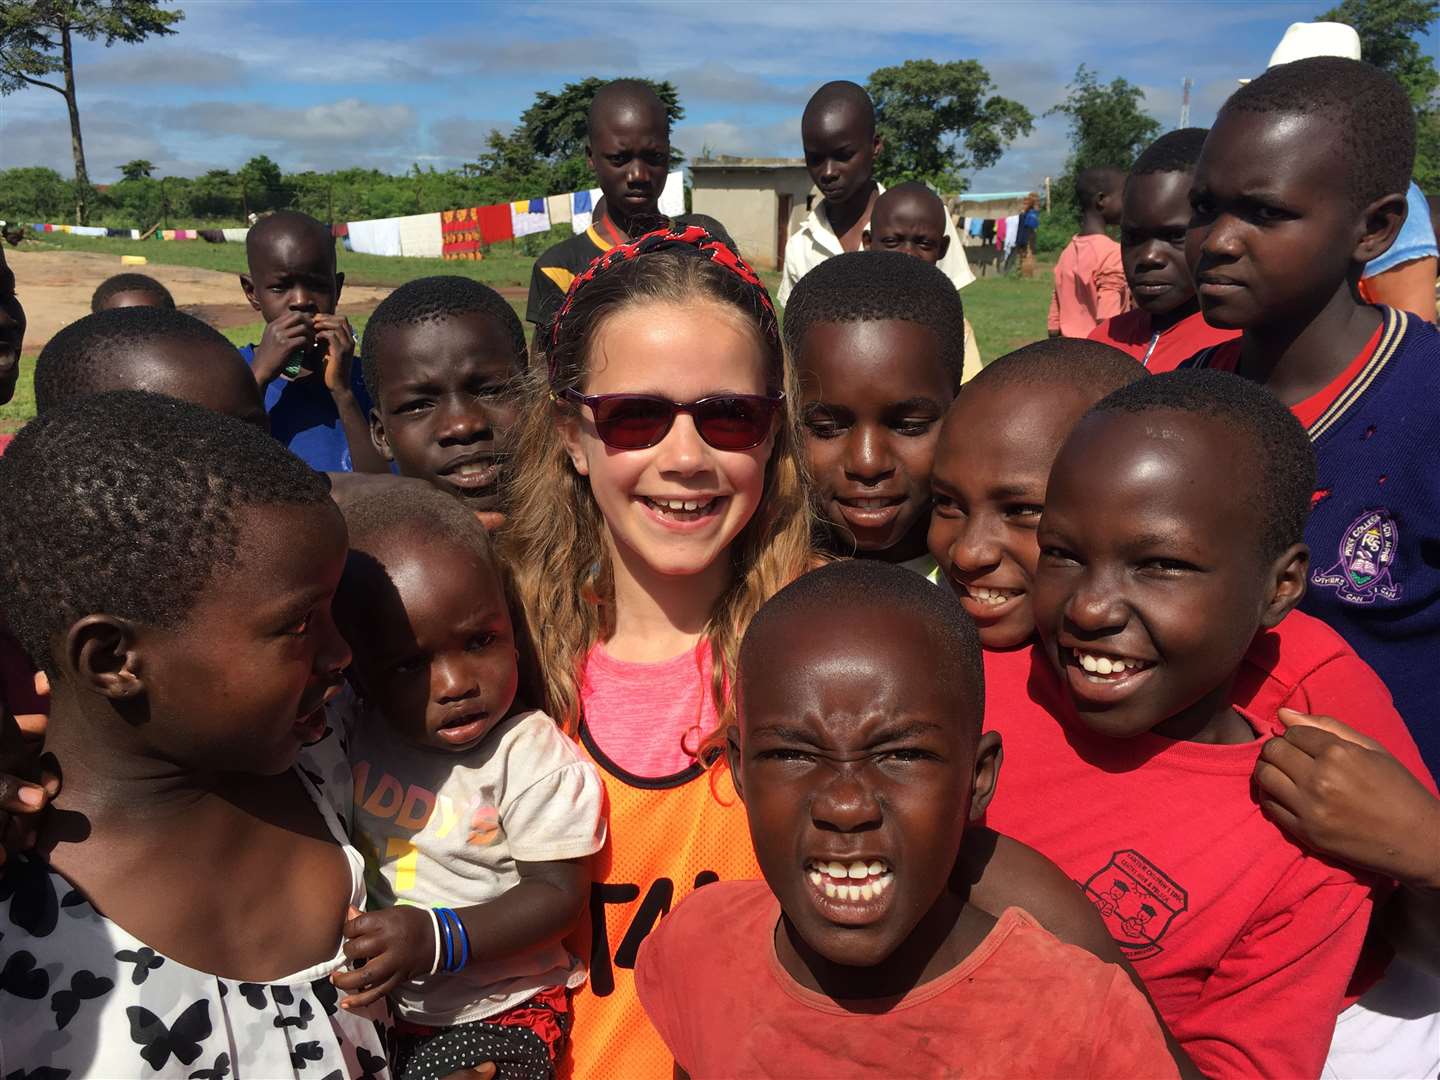 Nia surrounded by some of the Ugandan youngsters.